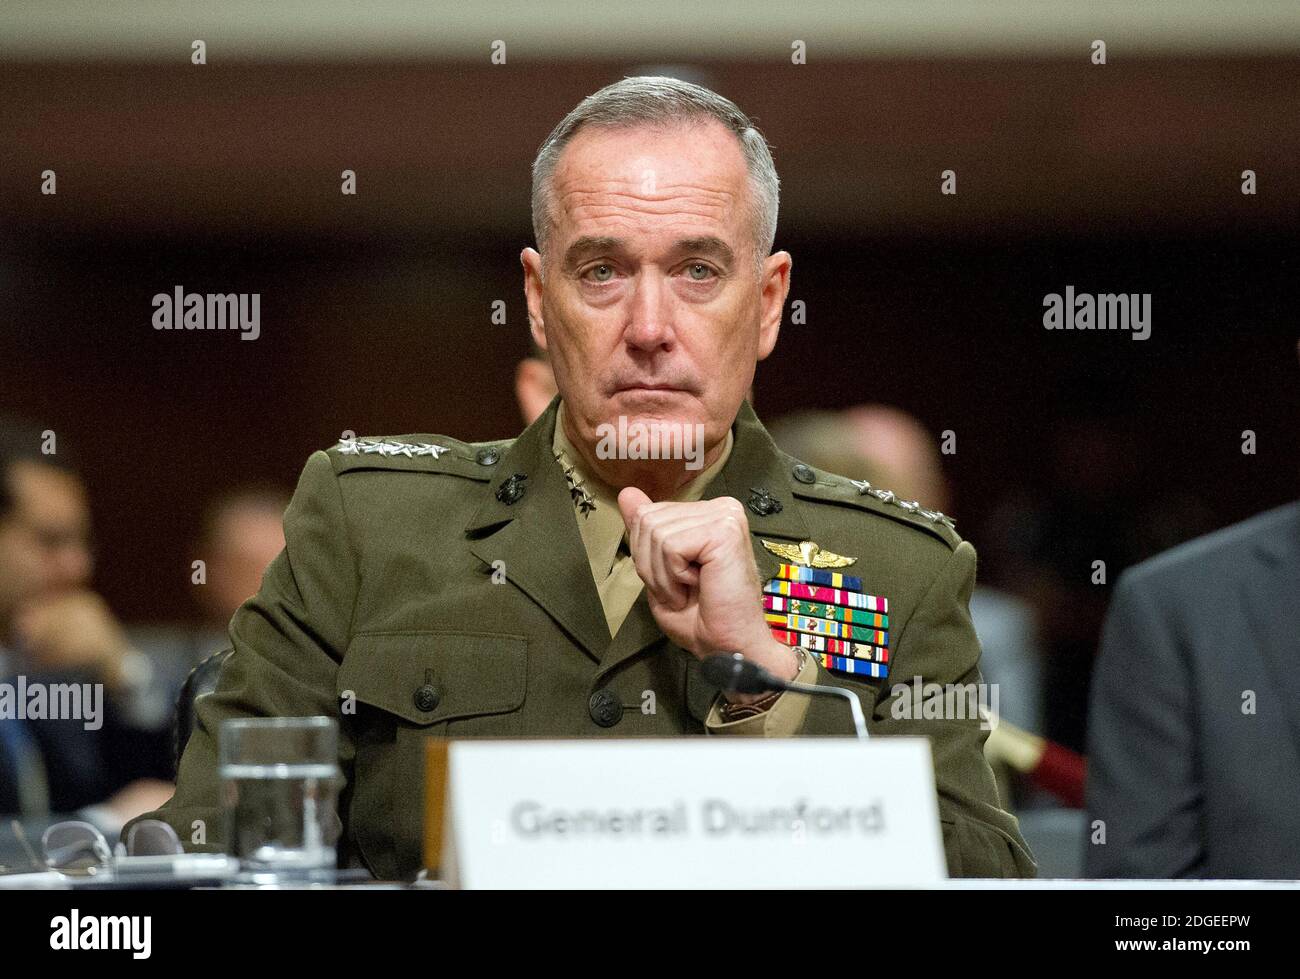 General Joseph F. Dunford, Jr., US Marine Corps, Chairman of the Joint Chiefs of Staff, gives testimony before the US Senate Committee on Armed Services on 'the Department of Defense budget posture in review of the Defense Authorization Request for Fiscal Year 2018 and the Future Years Defense Program' on Capitol Hill in Washington, DC on Tuesday, June 13, 2017.Photo by Ron Sachs / CNP/ABACAPRESS.COM Stock Photo